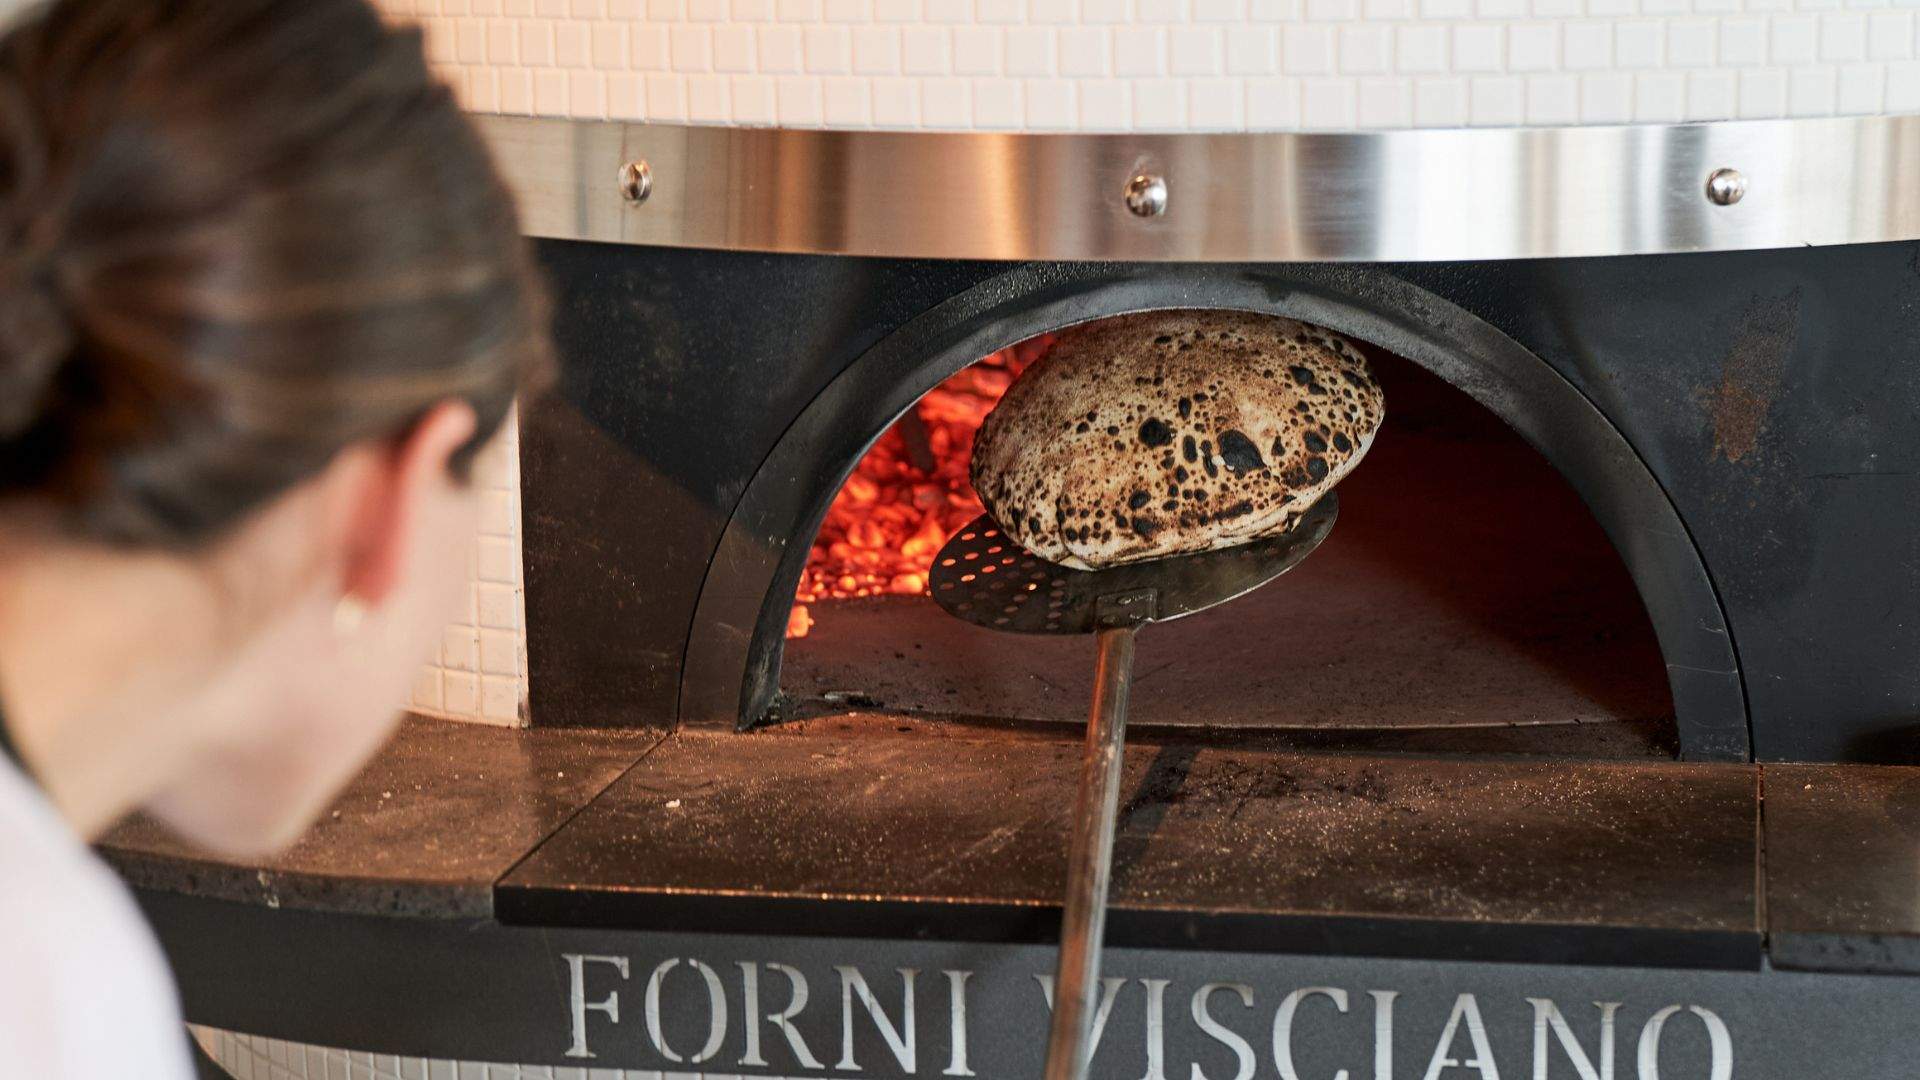 Merivale's Highly Anticipated Italian Diner Totti's Will Open This Weekend in the Lorne Hotel